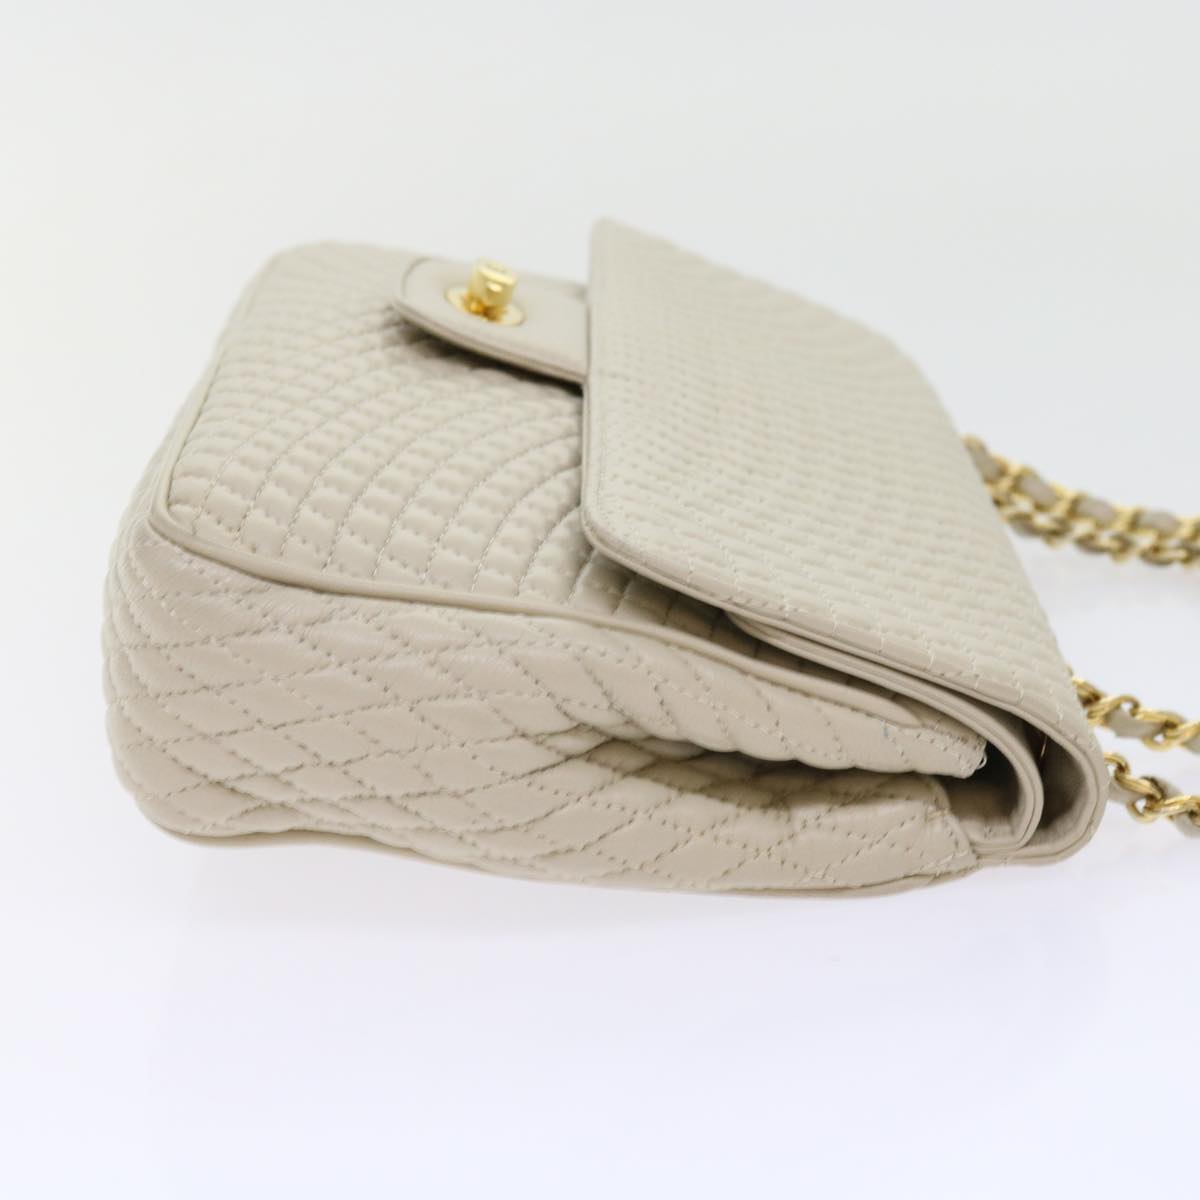 Bally Chain Quilted Shoulder Bag Leather Beige Auth Am5593